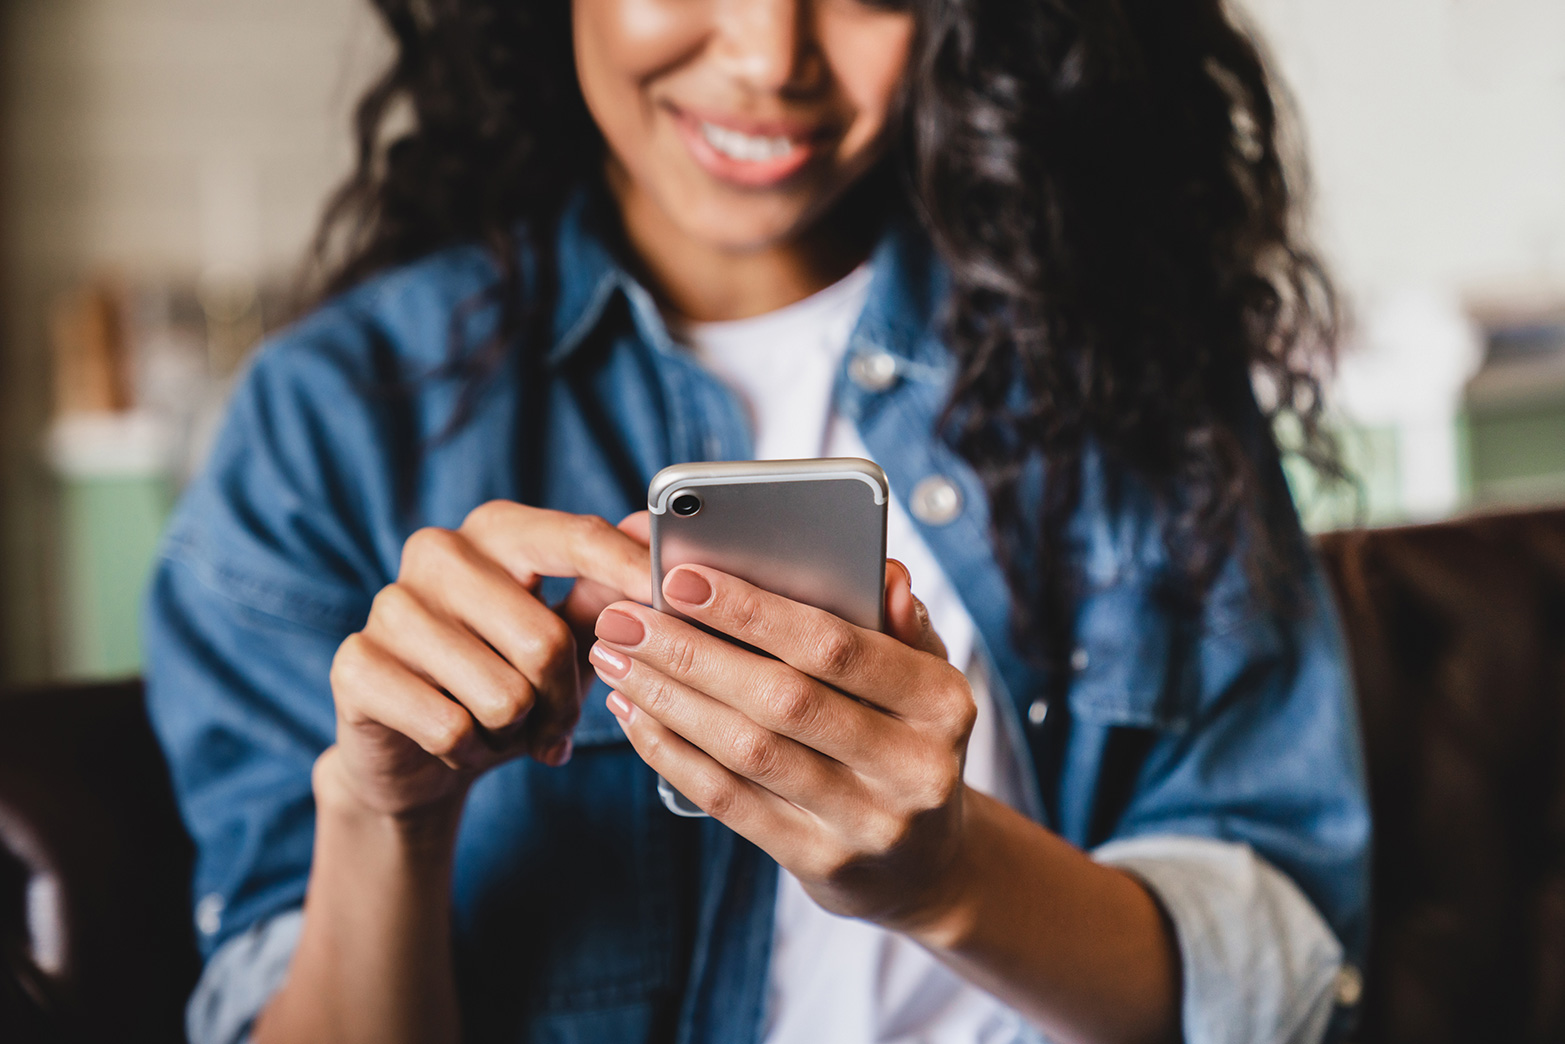 Smiling young woman holding a smartphone